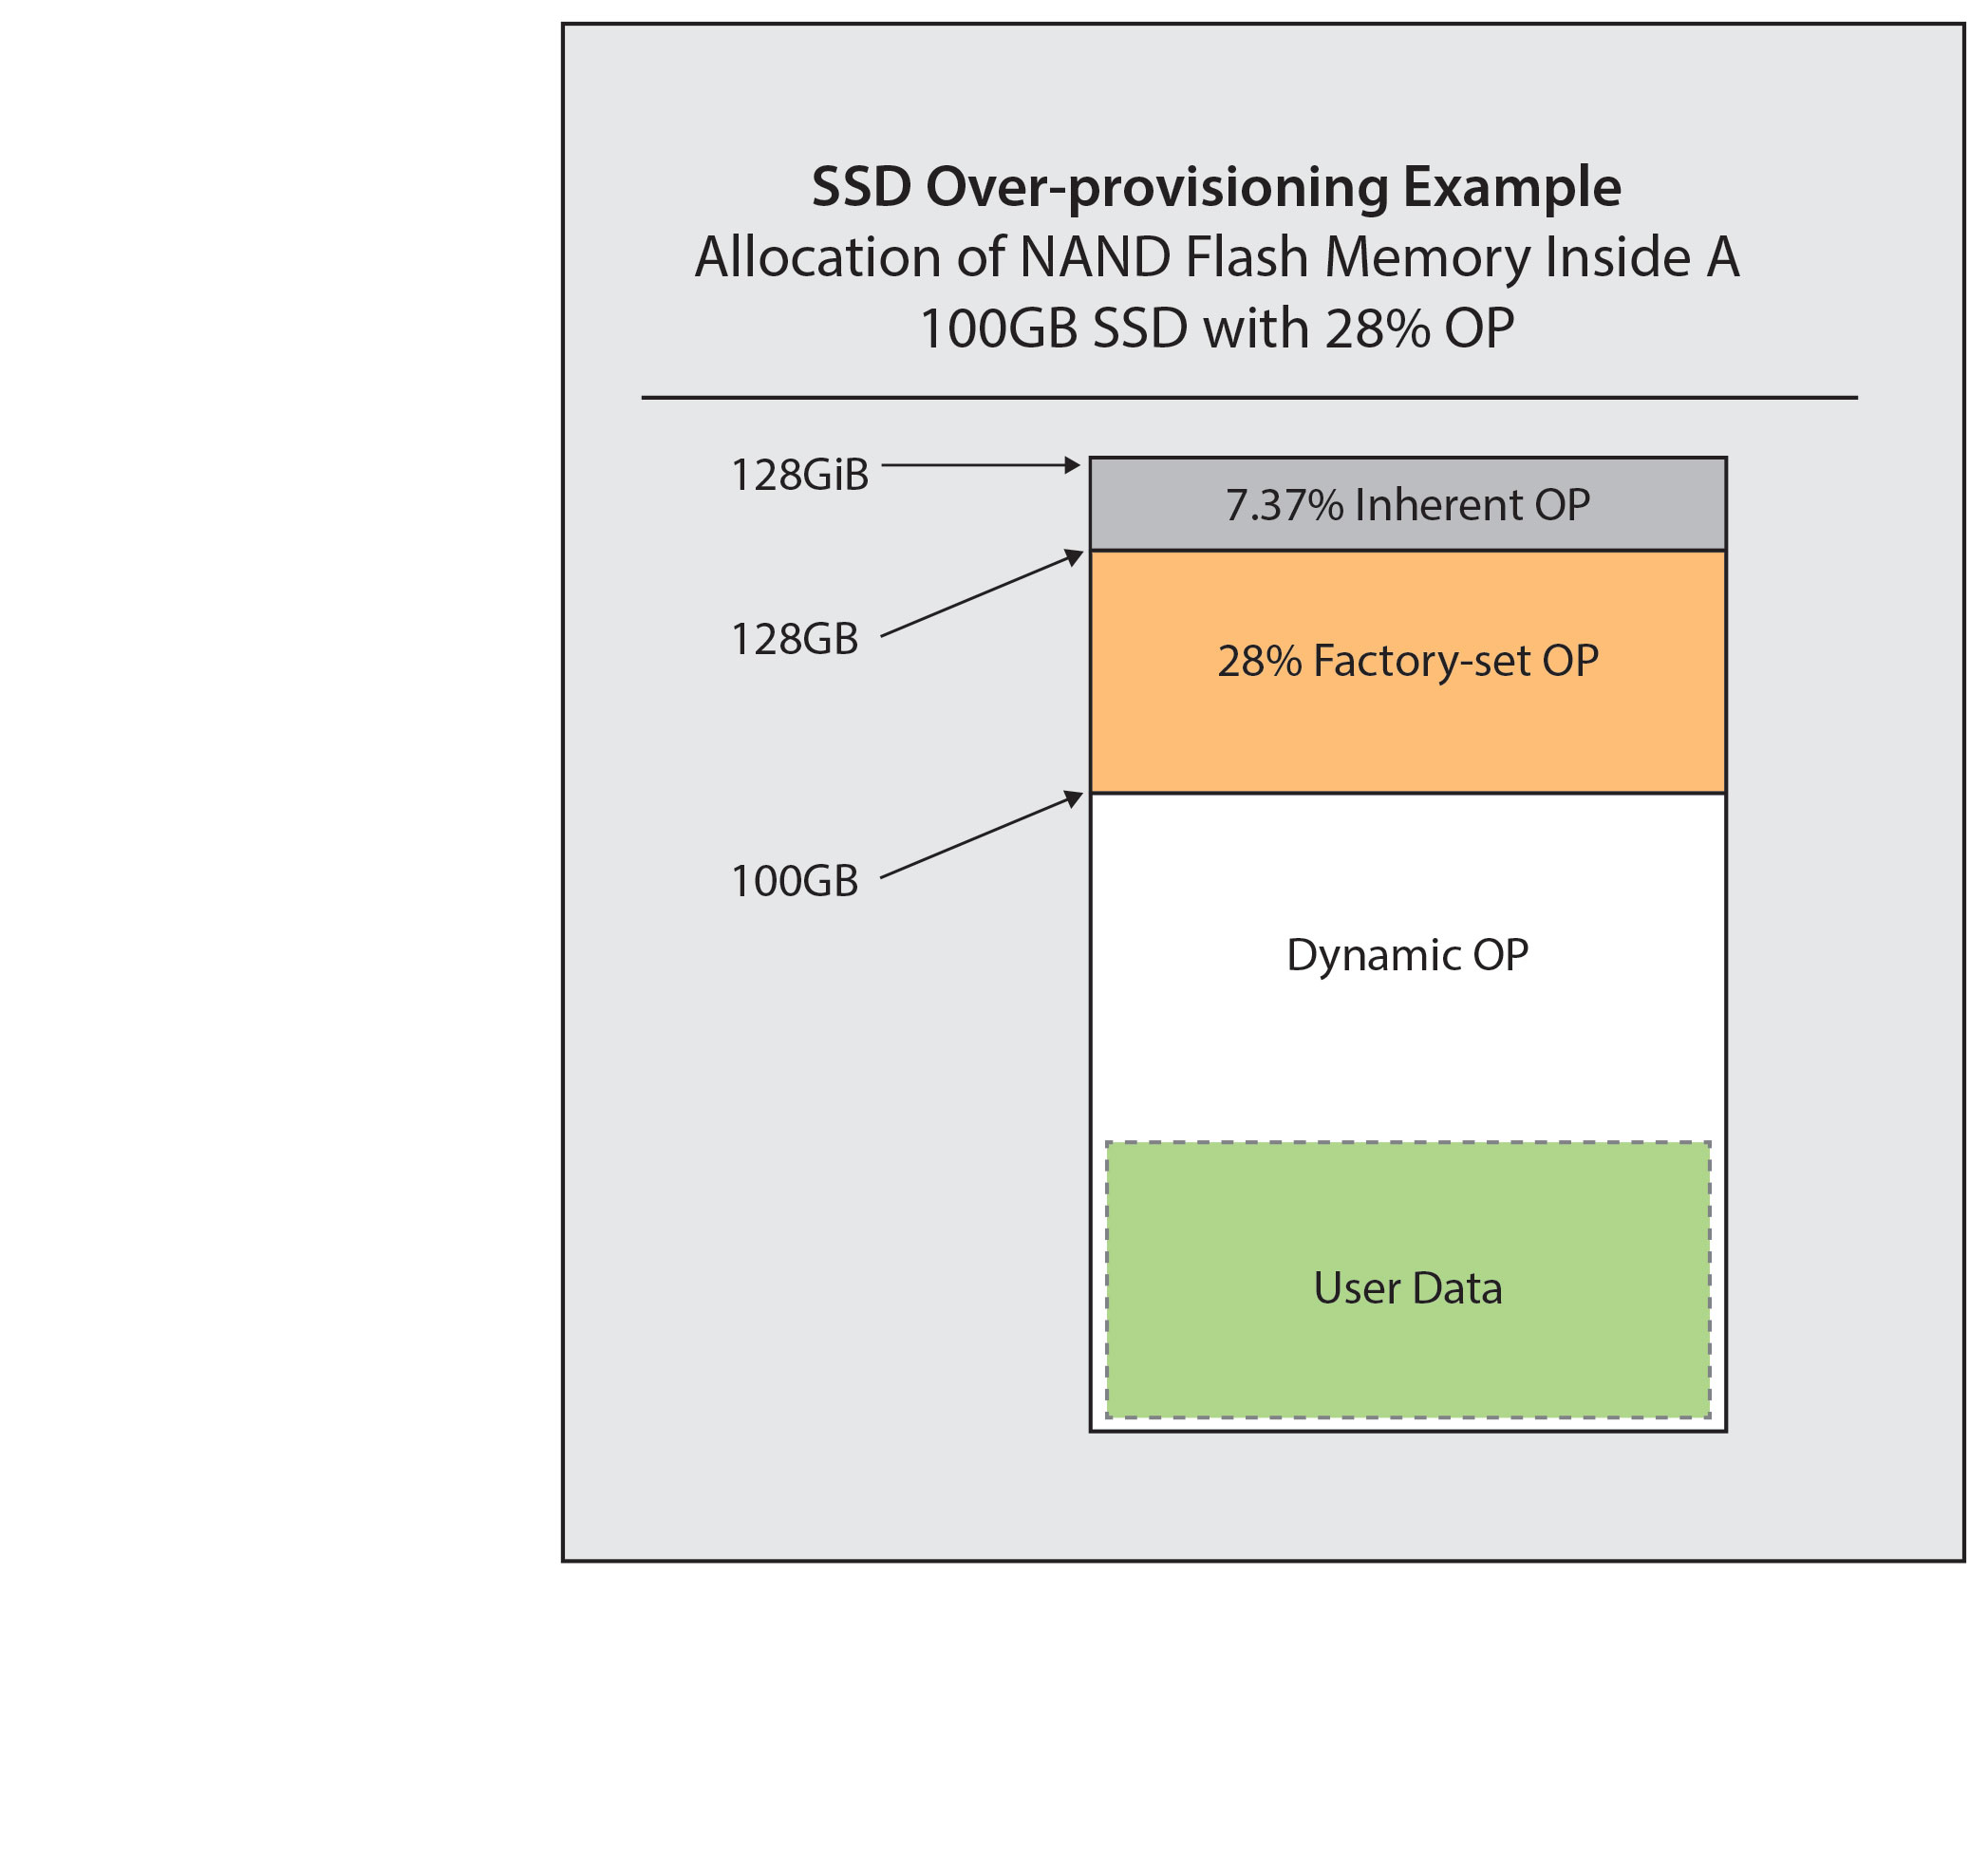 ssd-over-provisioning-example